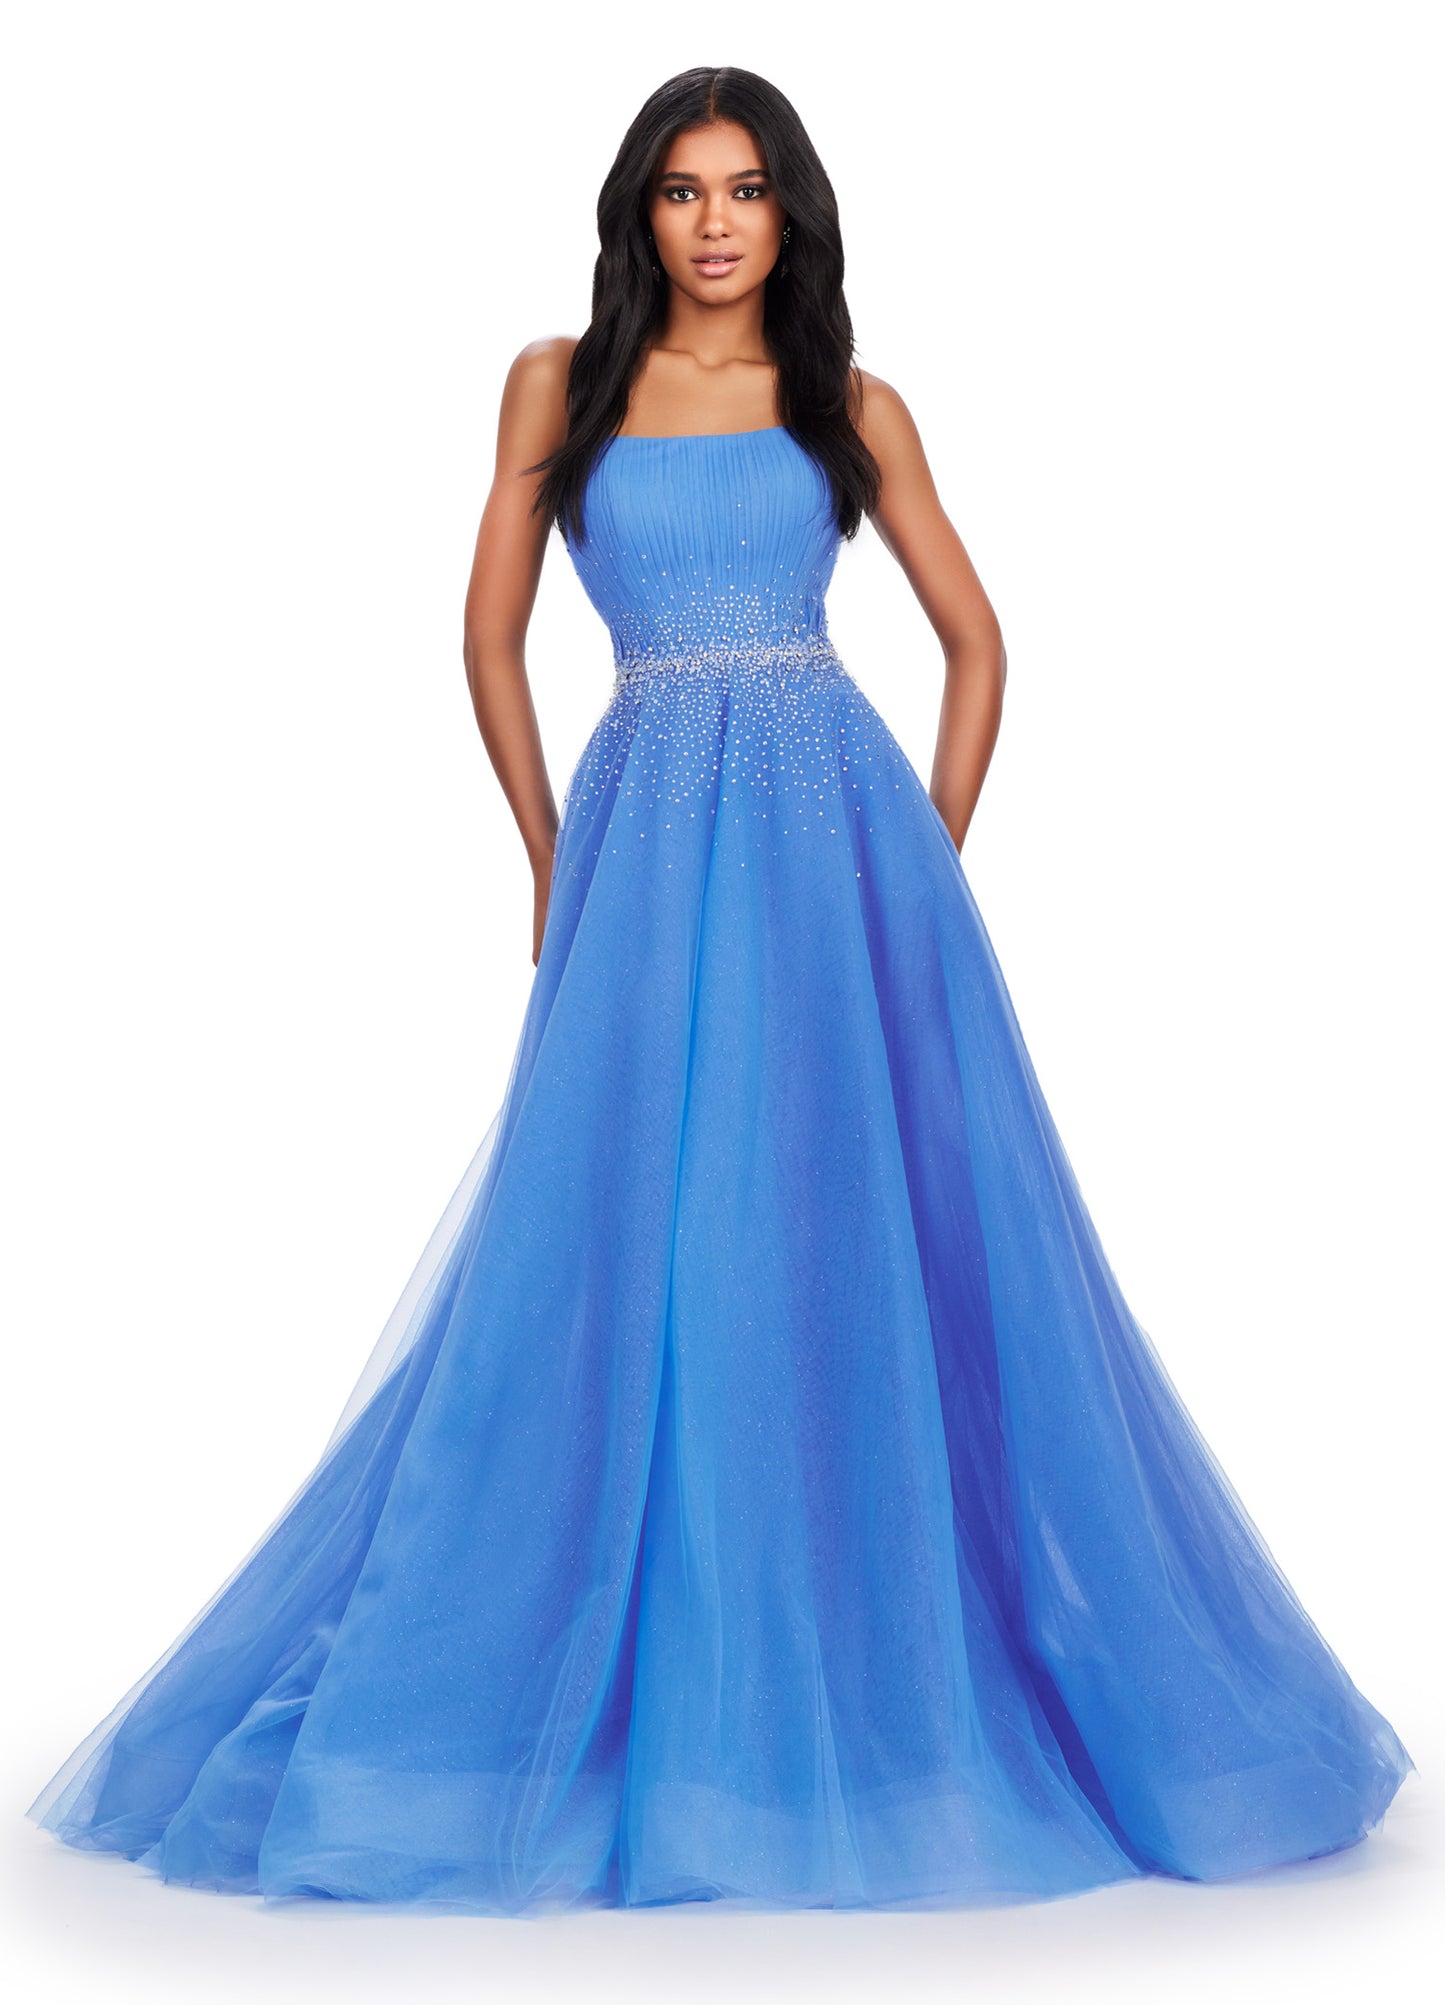 Expertly crafted by Ashley Lauren, this 11597 Long Prom Dress exudes timeless elegance. The strapless design coupled with glittery tulle creates a stunning ball gown silhouette. Adorned with a beautiful beaded belt, this formal pageant gown is a perfect choice for any special occasion. The perfect dress fit for a princess. This strapless glitter tulle ball gown features a beaded waist detail that'll be sure to make you sparkle at your next event!